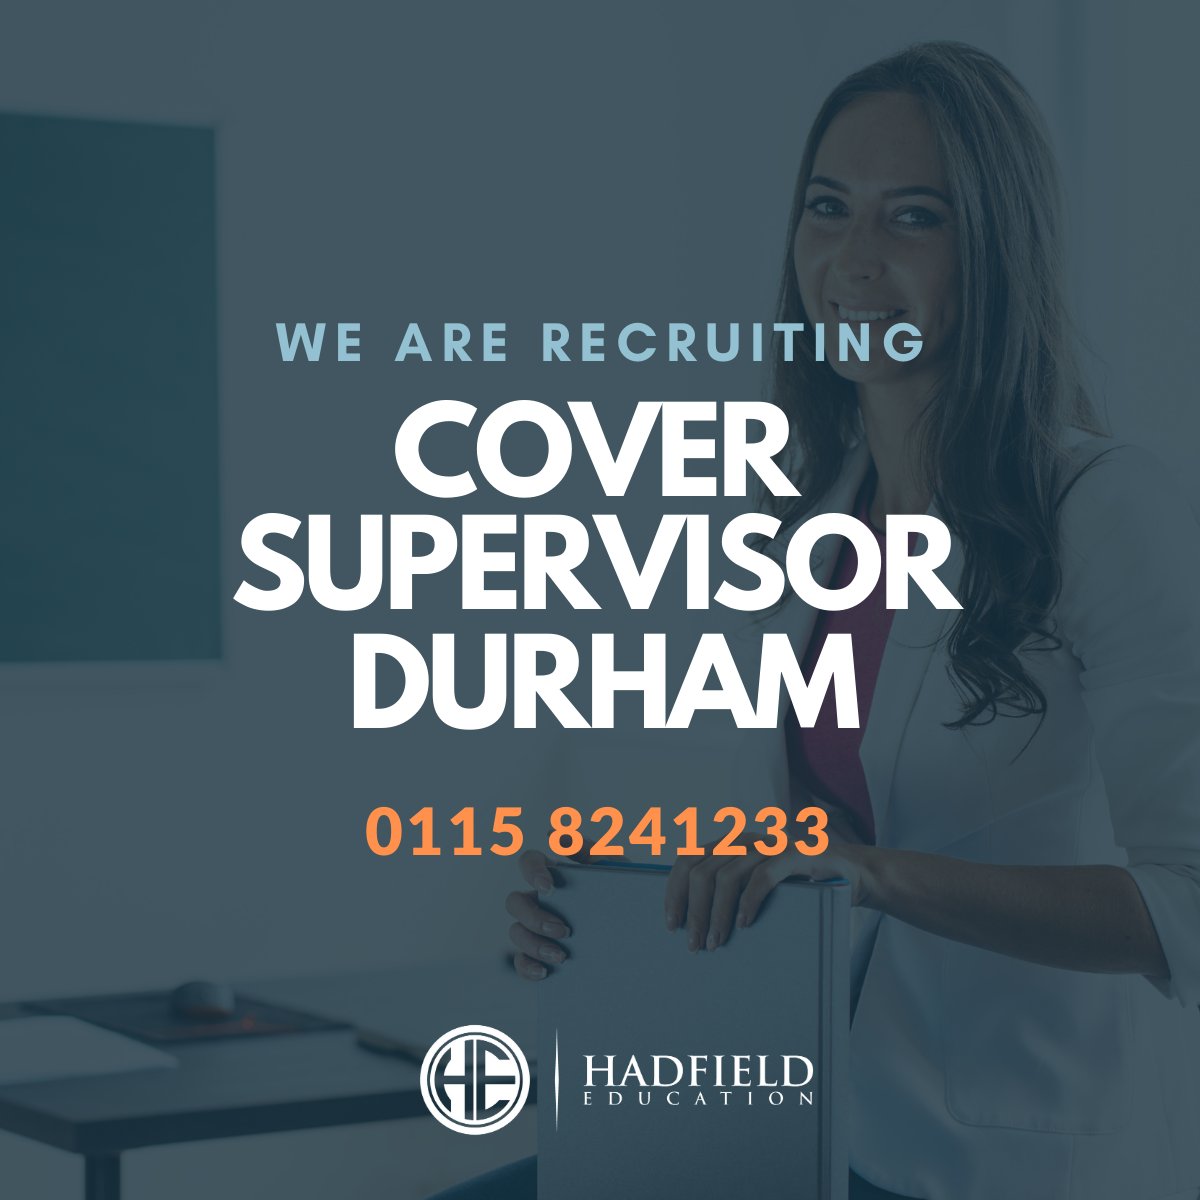 🌟 Fantastic job opportunity! 🌟 We're looking for a Cover Supervisor in 📍Durham 🎓 Apply now and be part of our dynamic team! 💼 #DurhamJobs #TeachingJobs #CoverSupervisorJobs 🚀 bit.ly/3OS5WYX